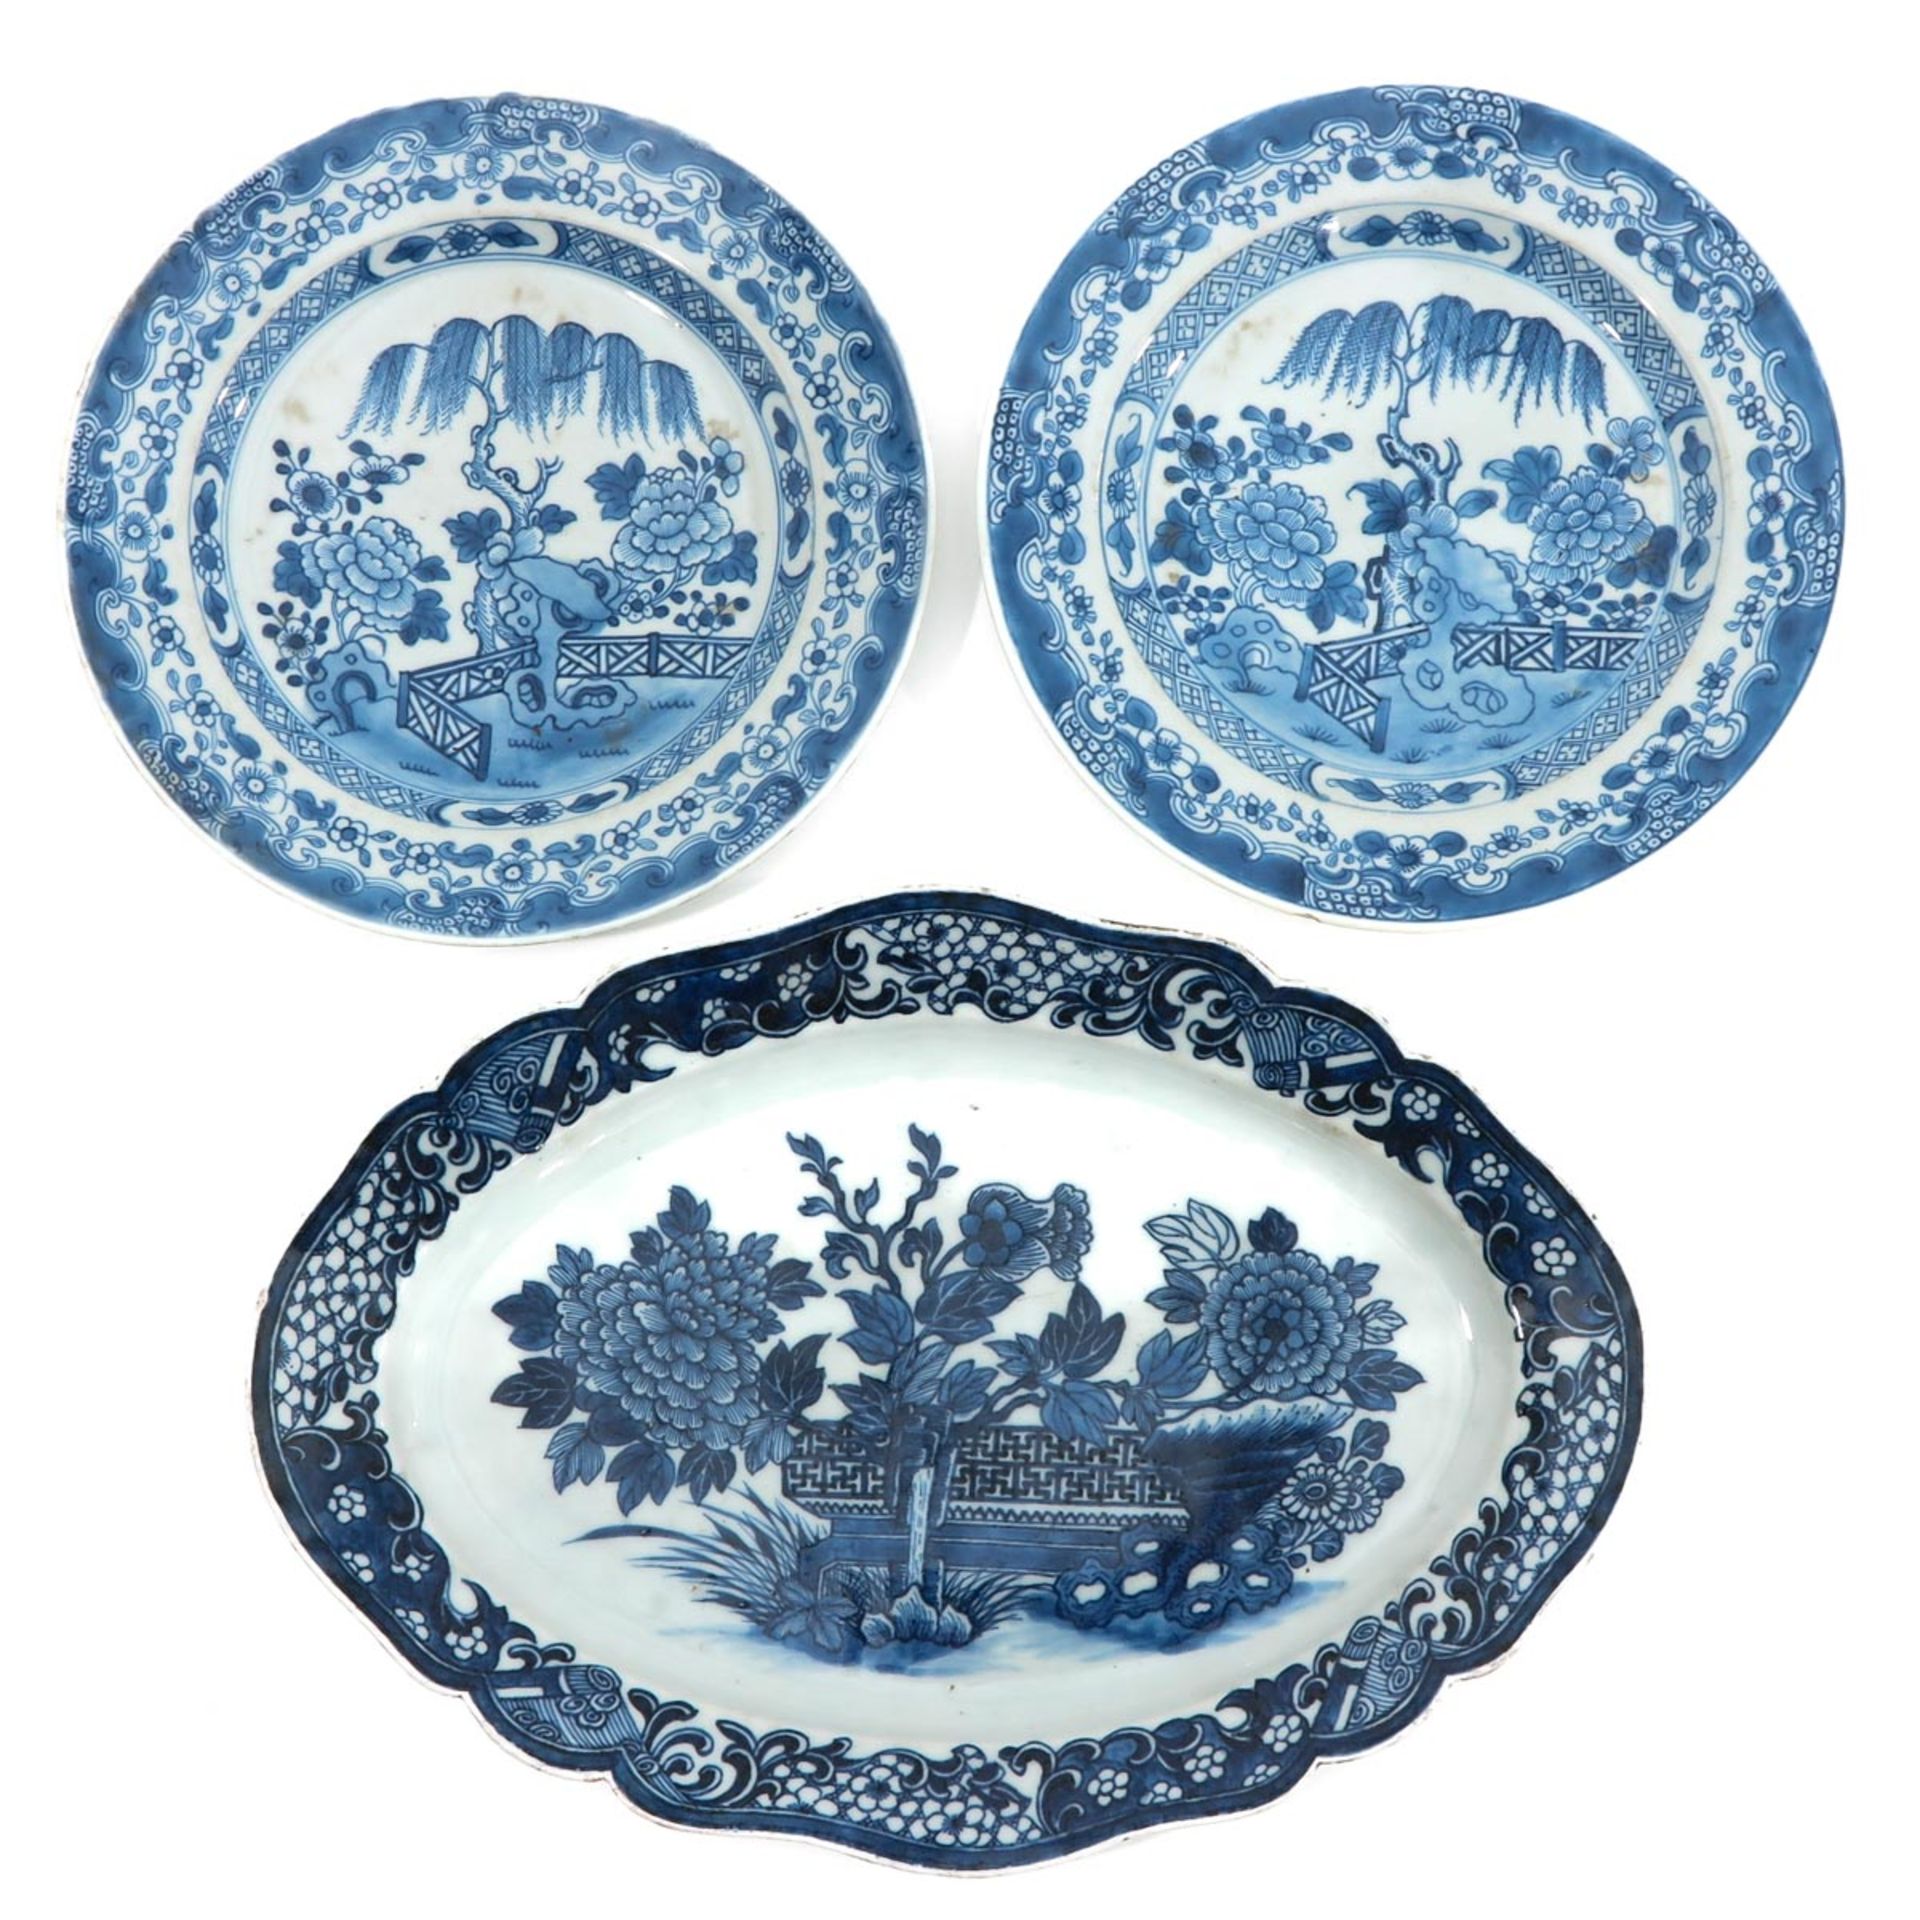 A Serving Tray and 2 Plates